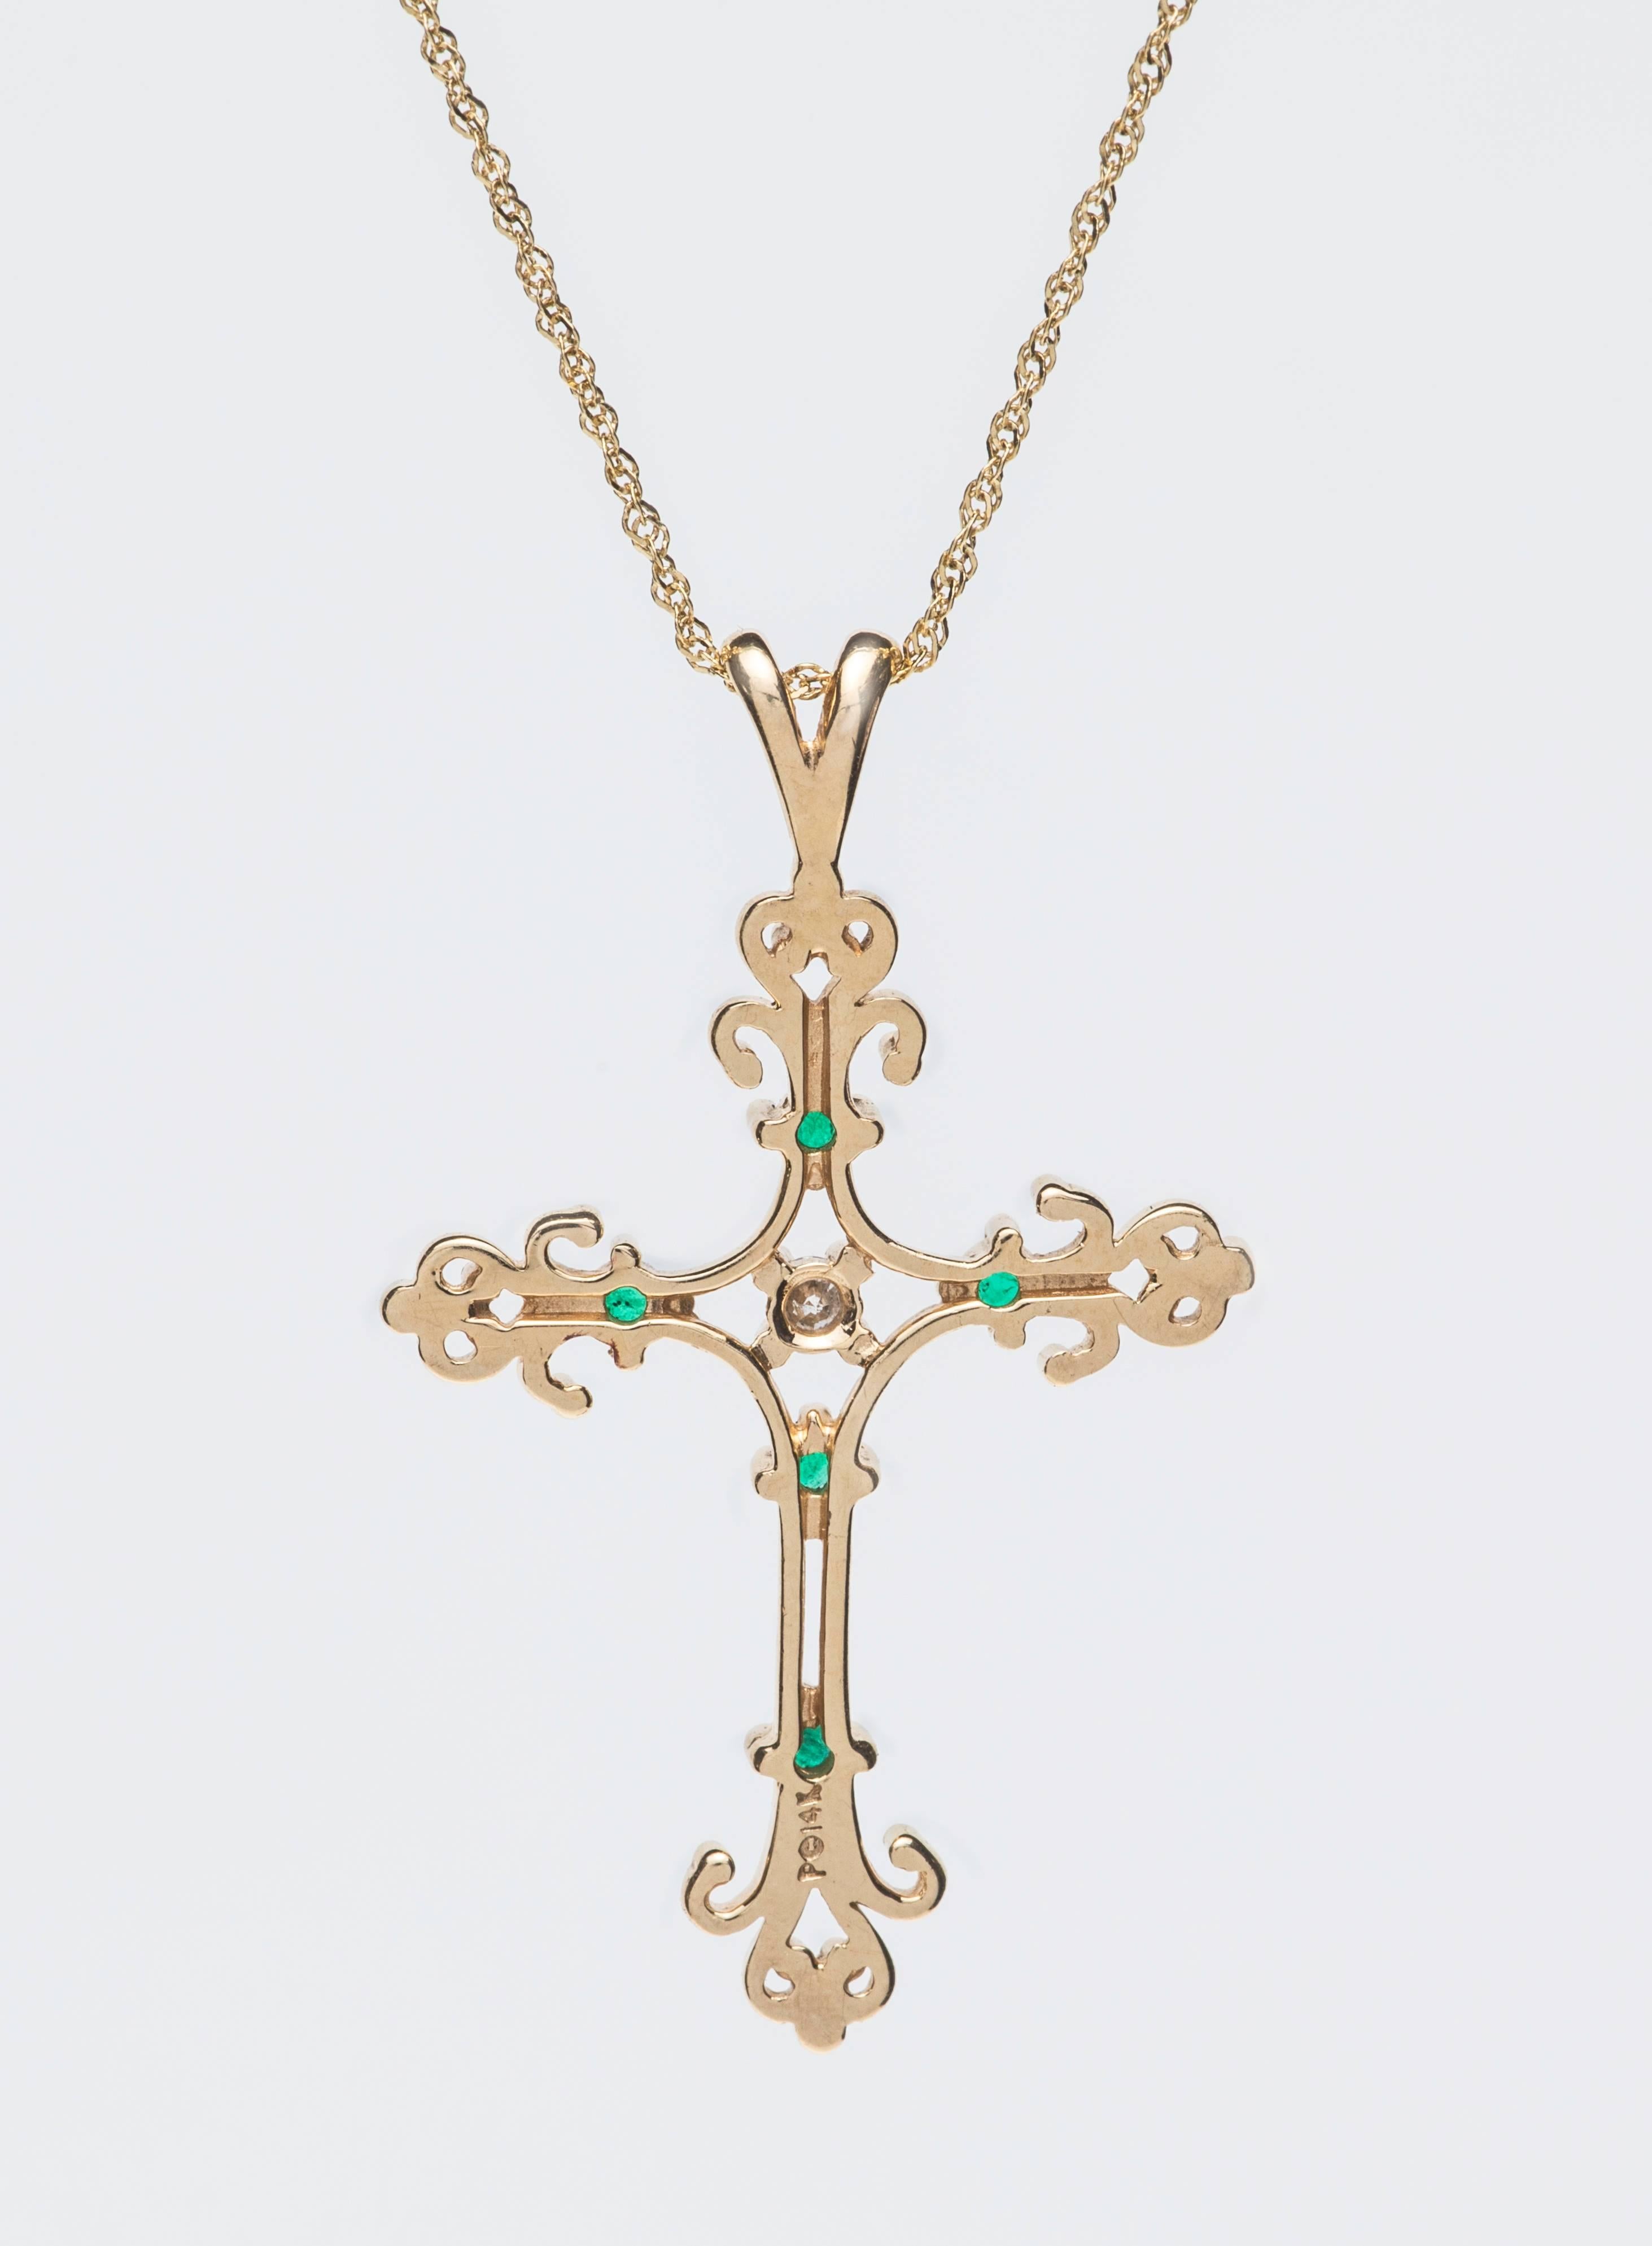 Beautiful and delicate filigree cross.  14k yellow gold with 17.5" 14k gold chain.
Five emerald stones with center diamond.  